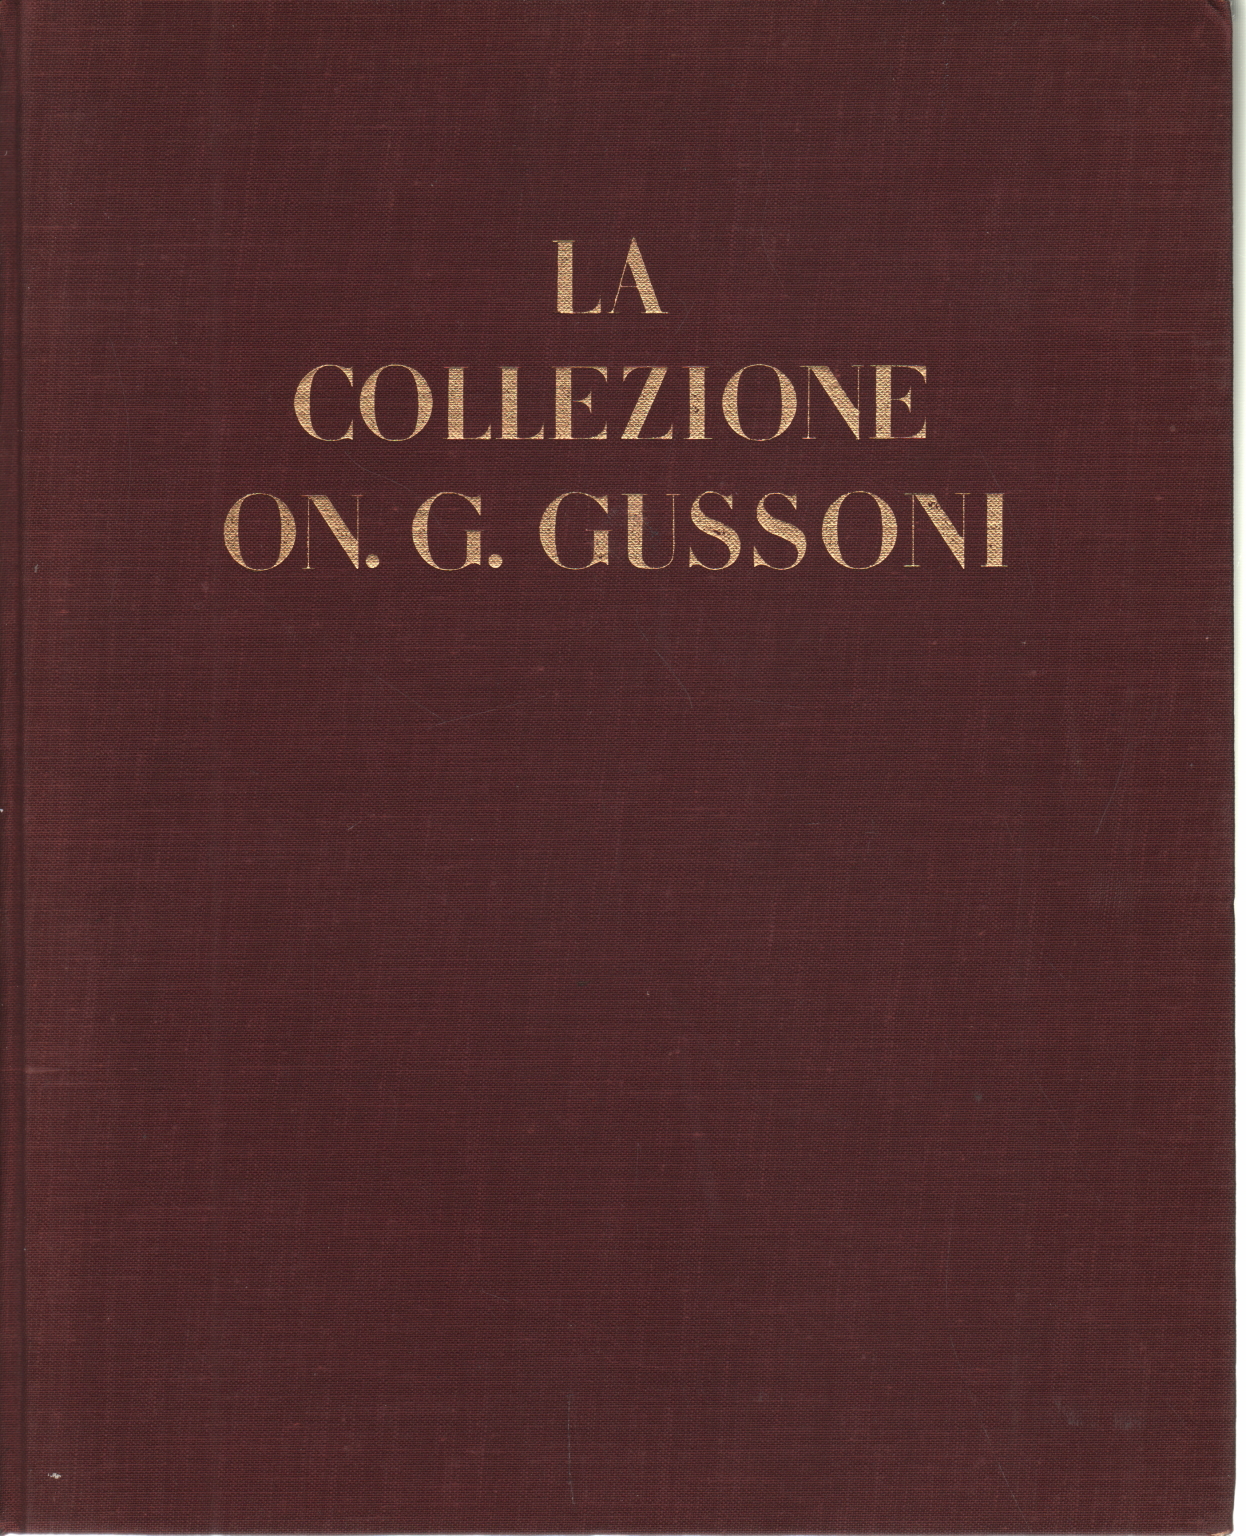 The On. G. Gussoni collection